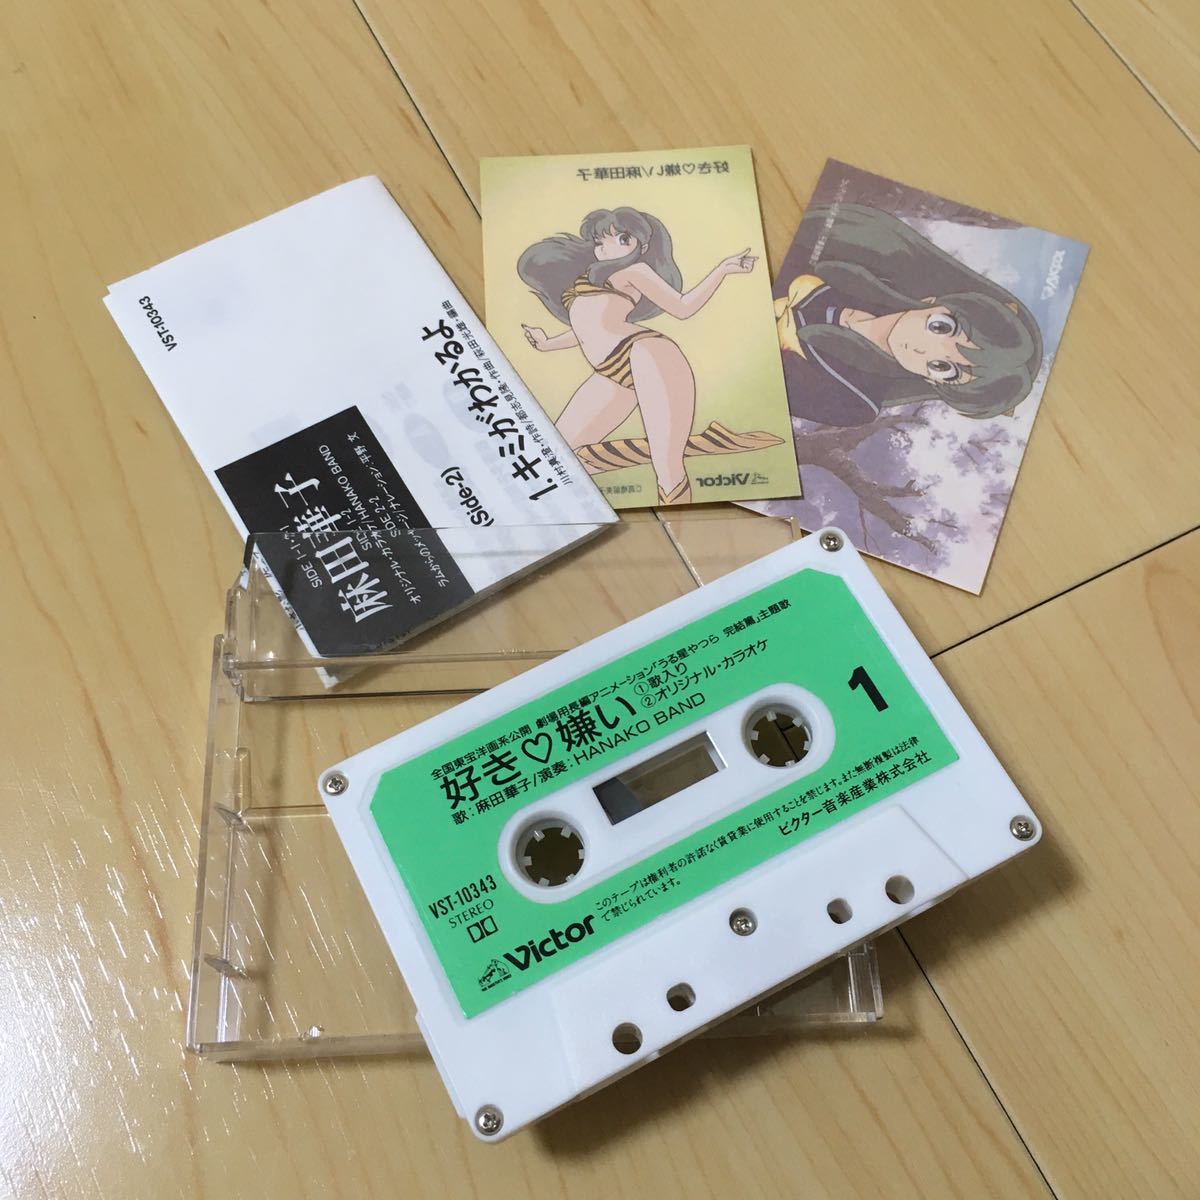  cassette tape flax rice field .. liking .. Urusei Yatsura .. compilation theme music rare that time thing records out of production Showa Retro Showa Retro flat . writing completion goods movie liking ..